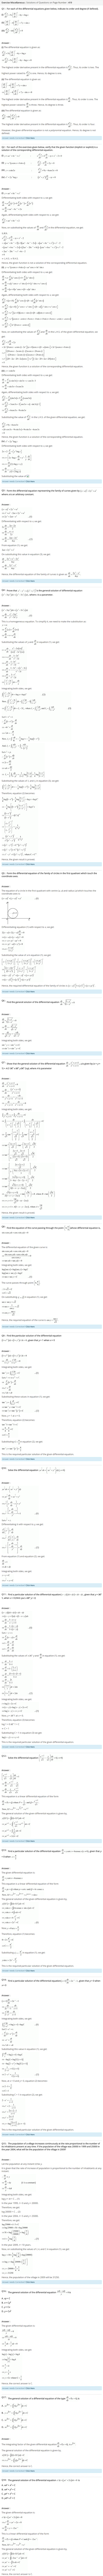 NCERT Solutions for Class 12 Maths Chapter 9 Differential Equations 8